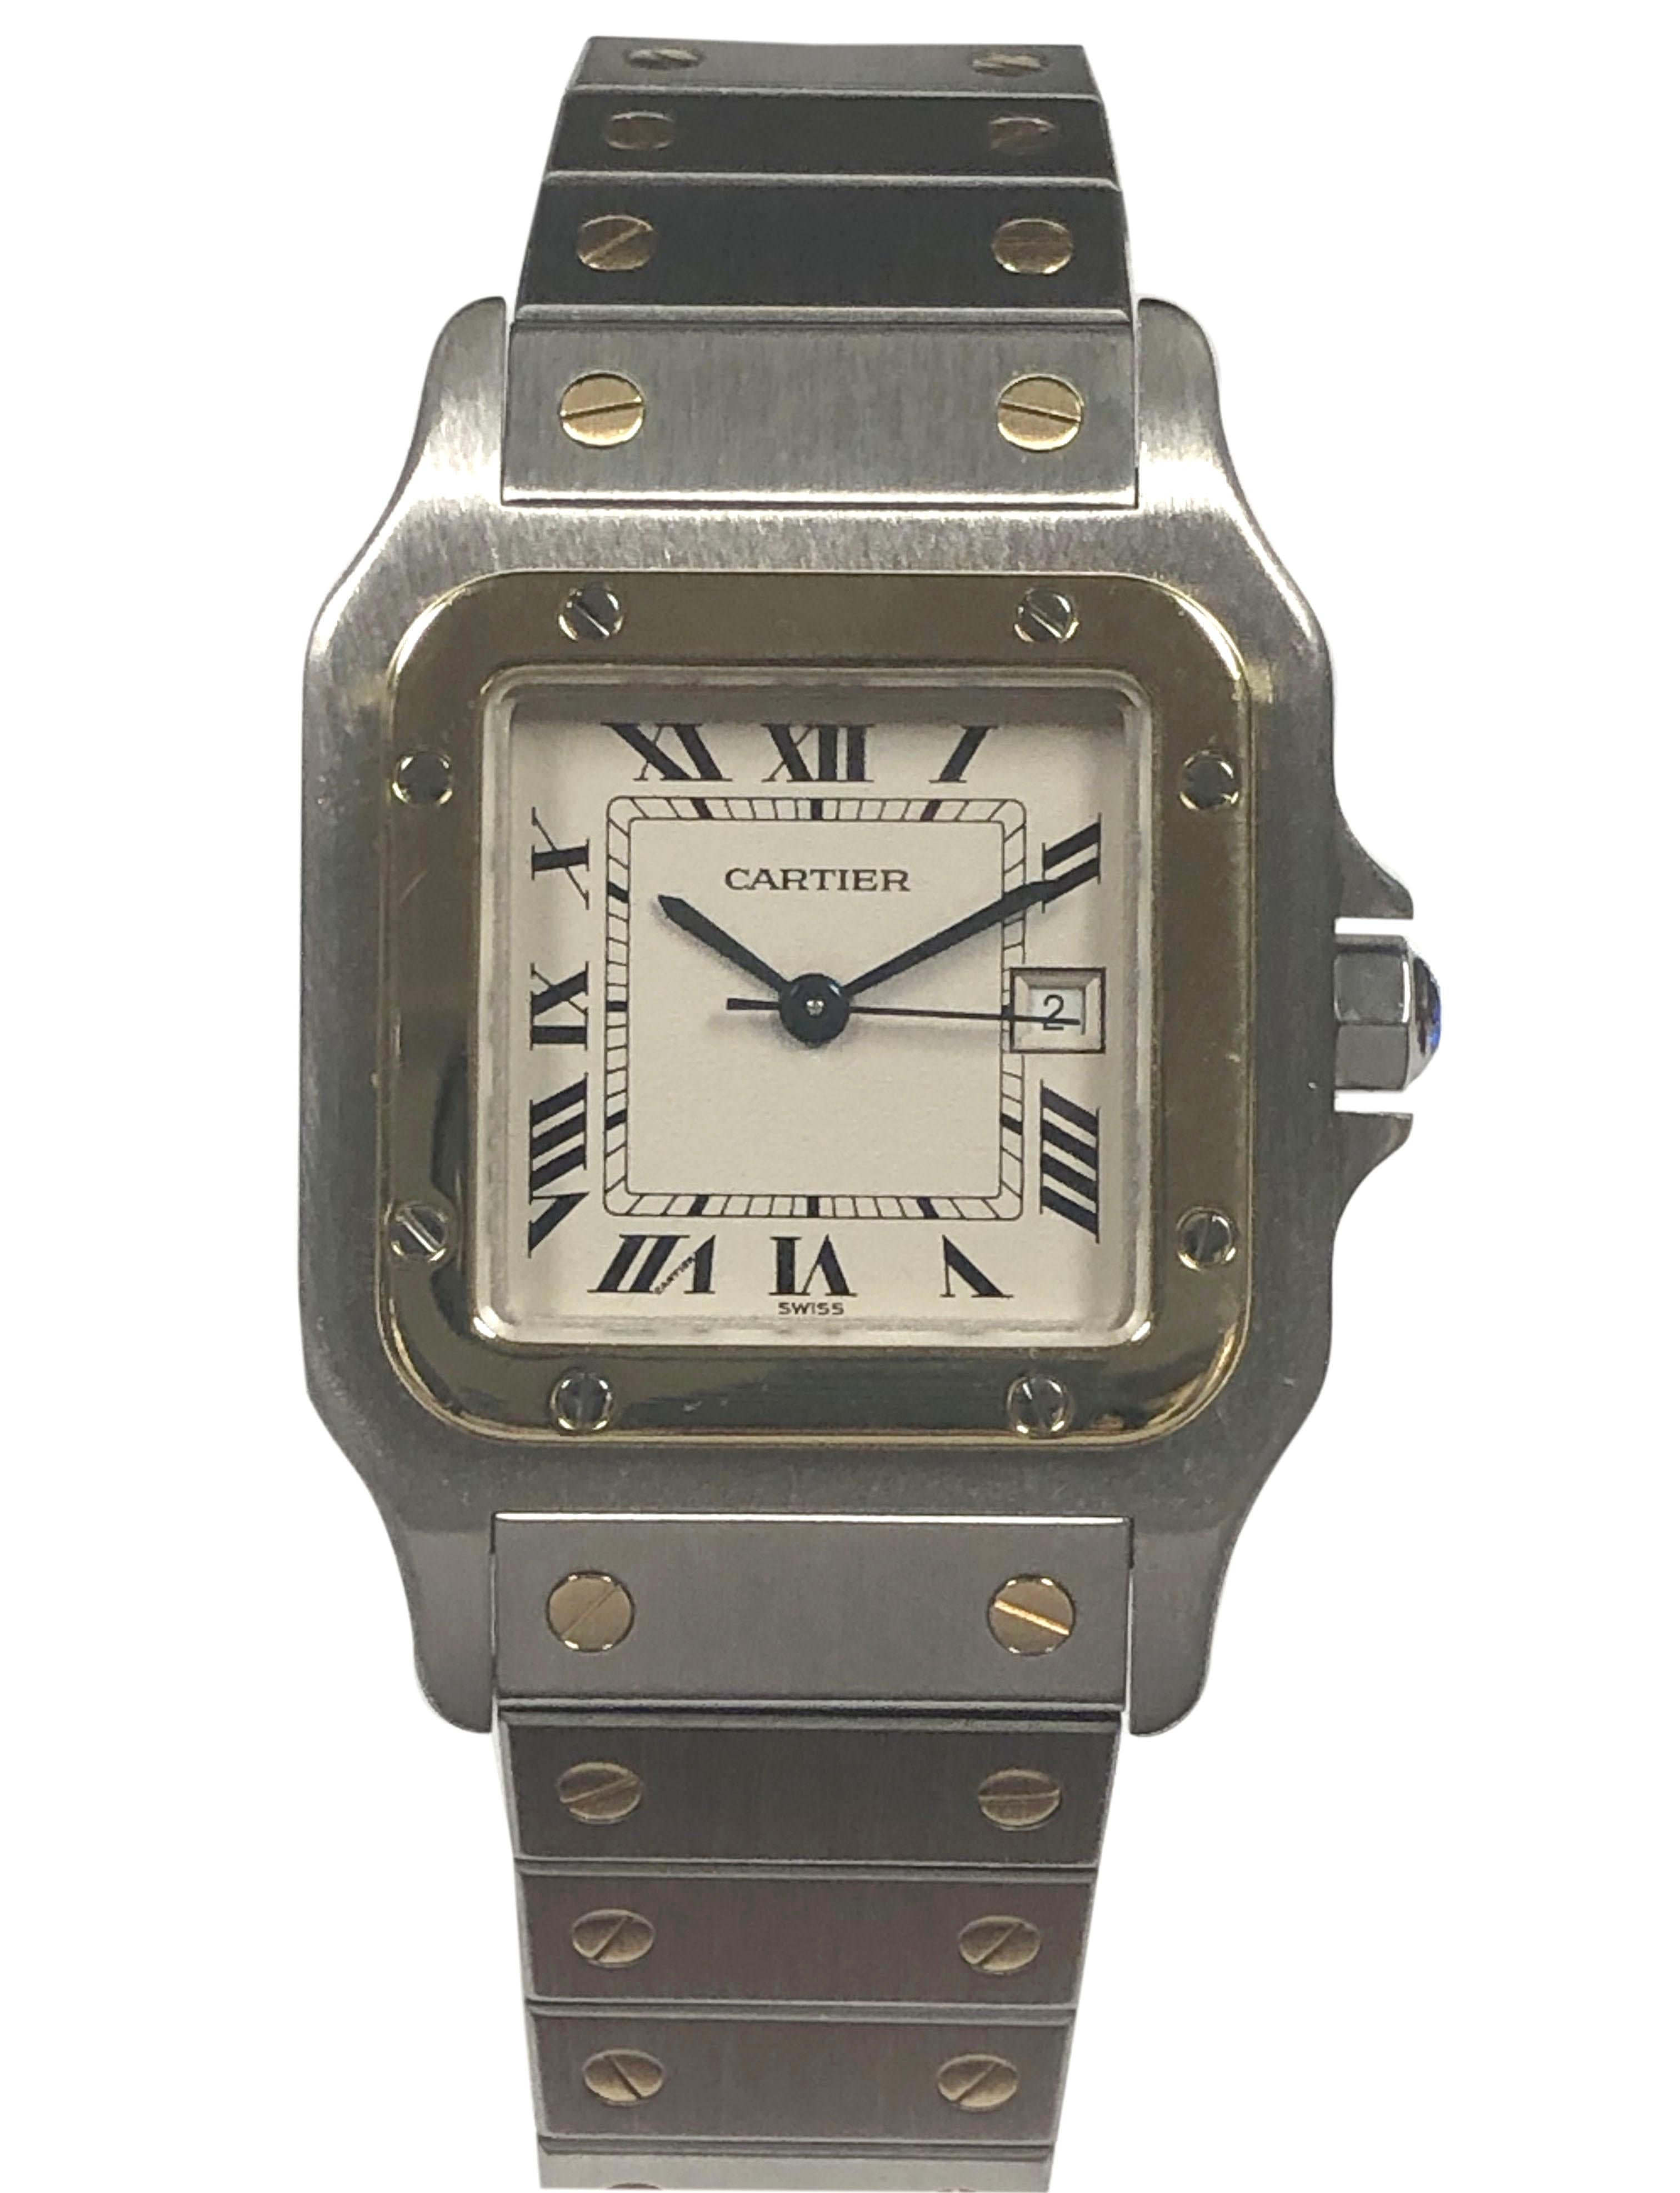 Circa 2000 Cartier Santos Galbee Wrist Watch 41 M.M. ( lug end to end ) X 29 M.M Stainless Steel case with 18K Yellow Gold Bezel and a Sapphire Crown, Automatic Self winding Movement, White Dial with Black Roman Numerals a Calendar window at the 3